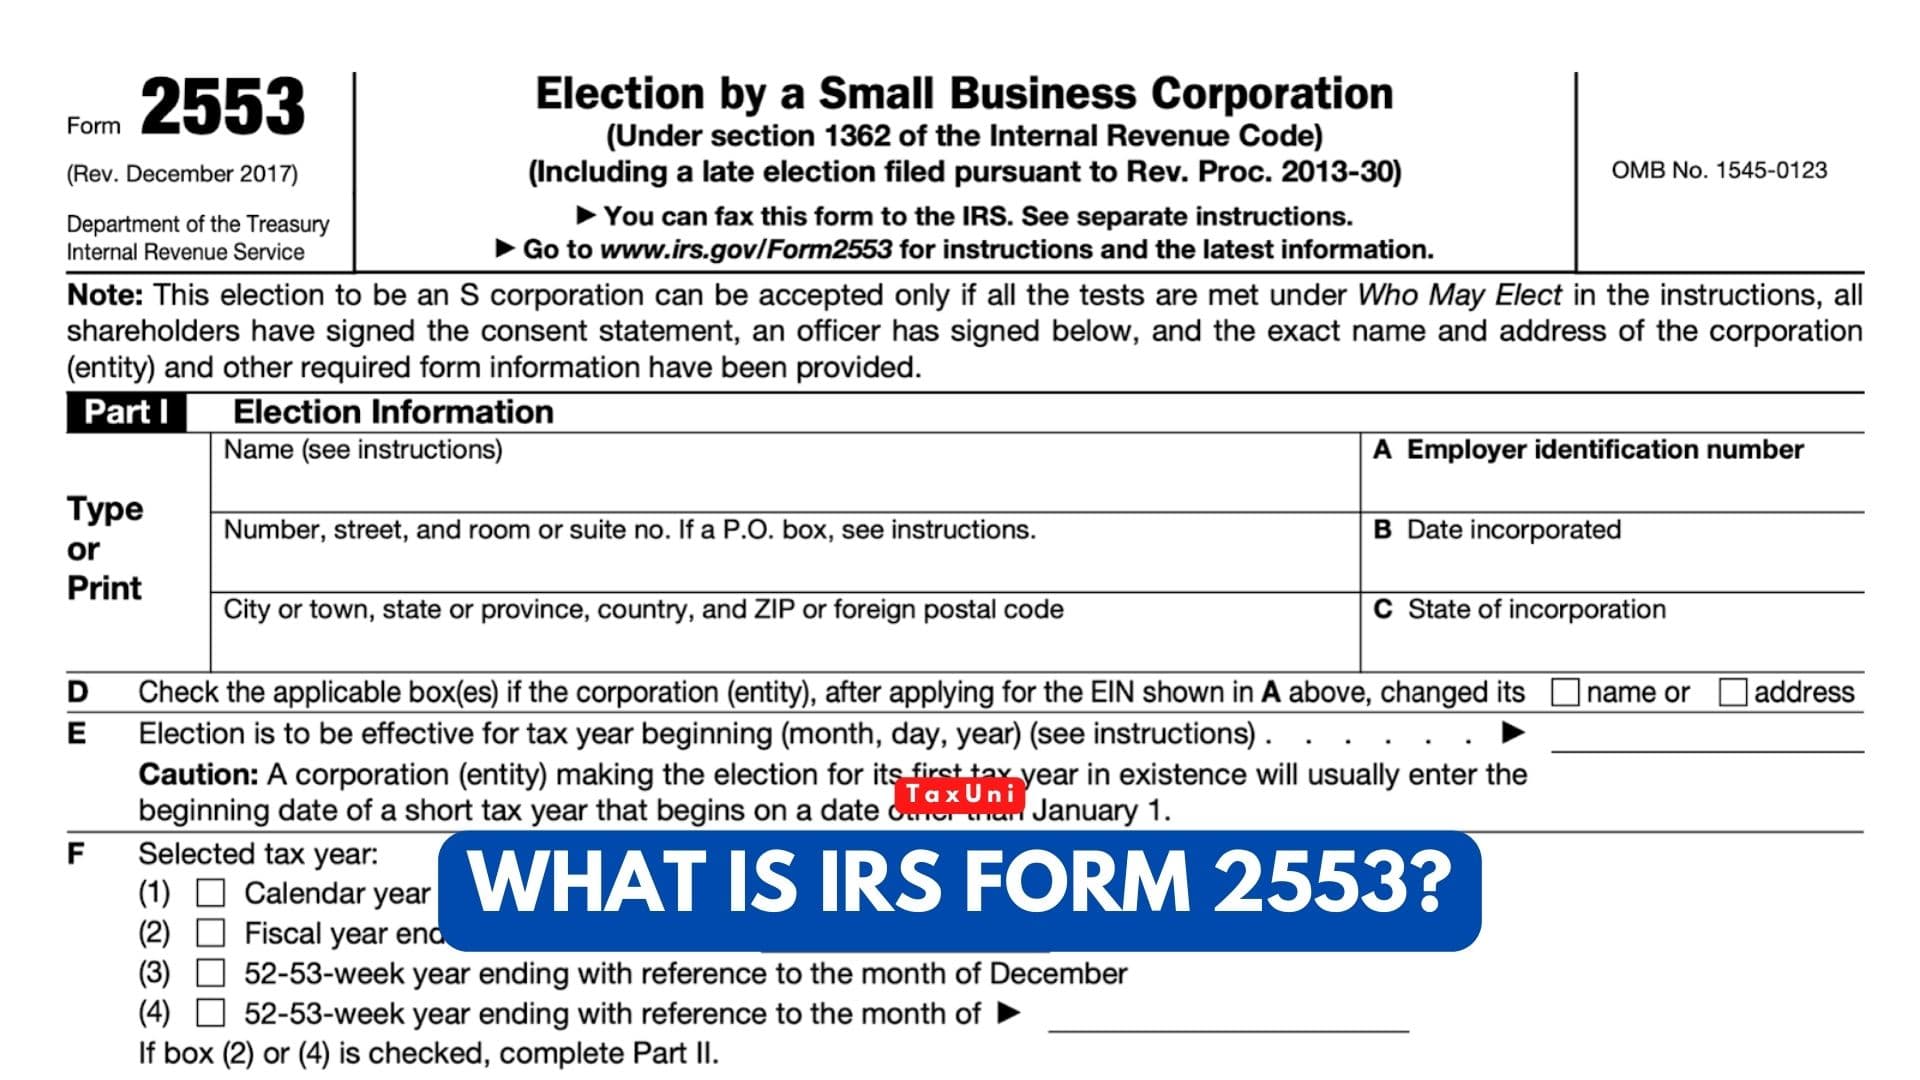 What is IRS Form 2553?